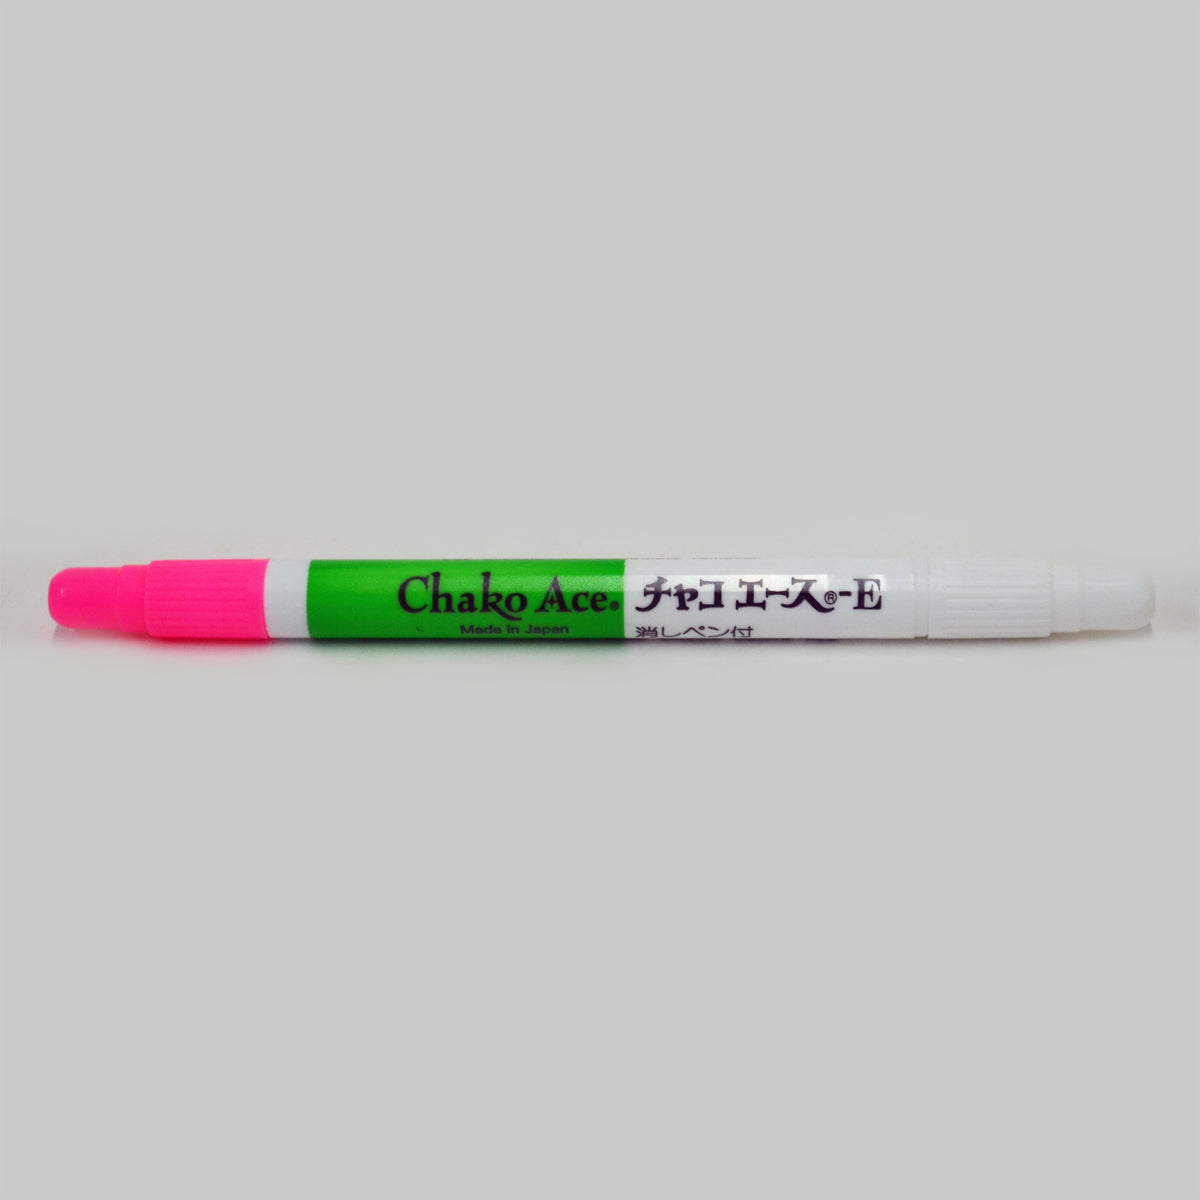 Penelope instant spons Adger Chako Ace Pen - Pink – Panda Int'l Trading of NY, Inc